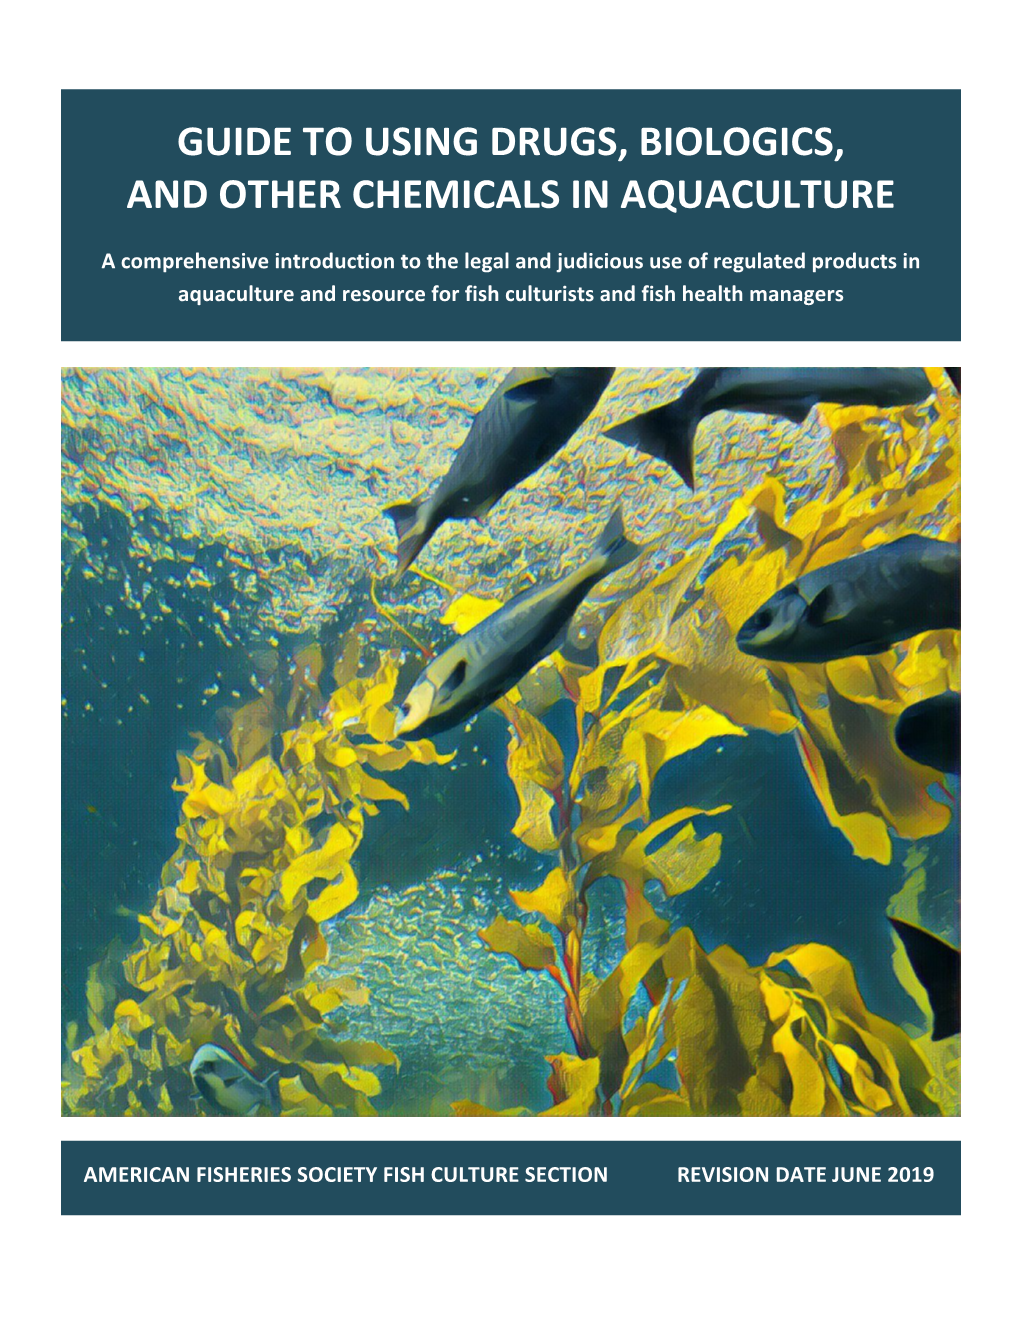 Guide to Using Drugs, Biologics, and Chemicals in Aquaculture